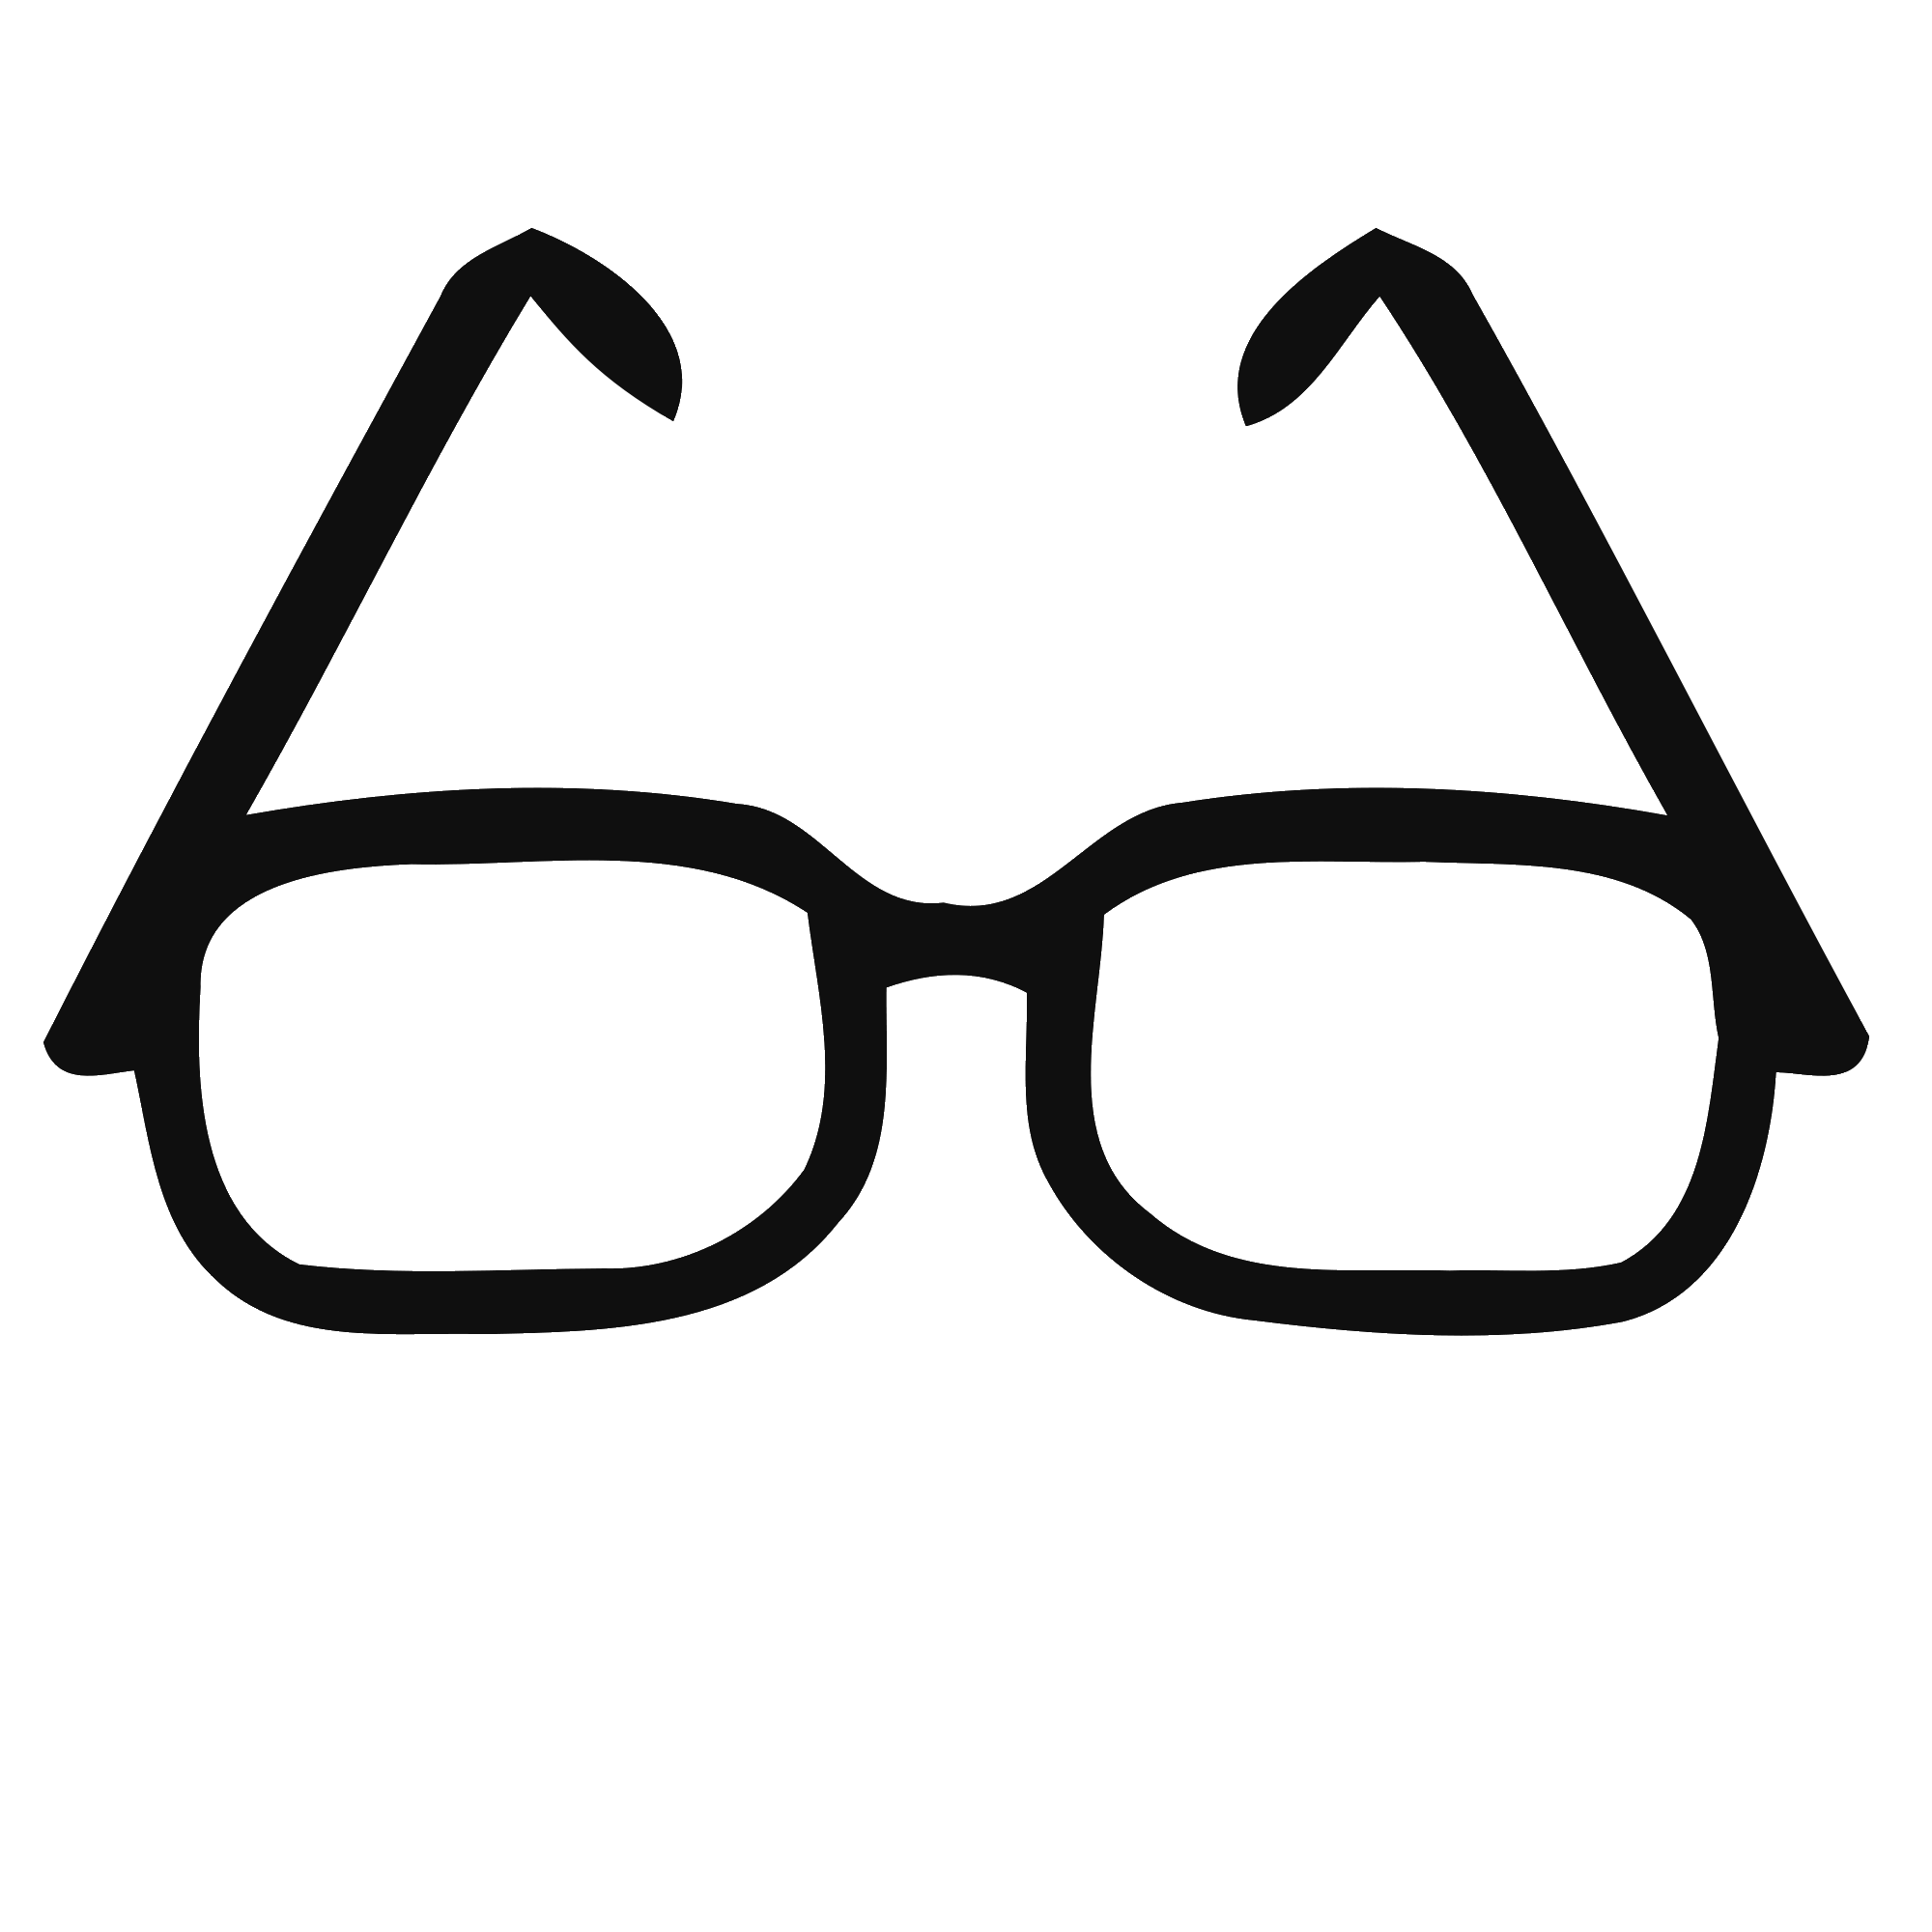 Transparent images png. File spectacles sg wikimedia